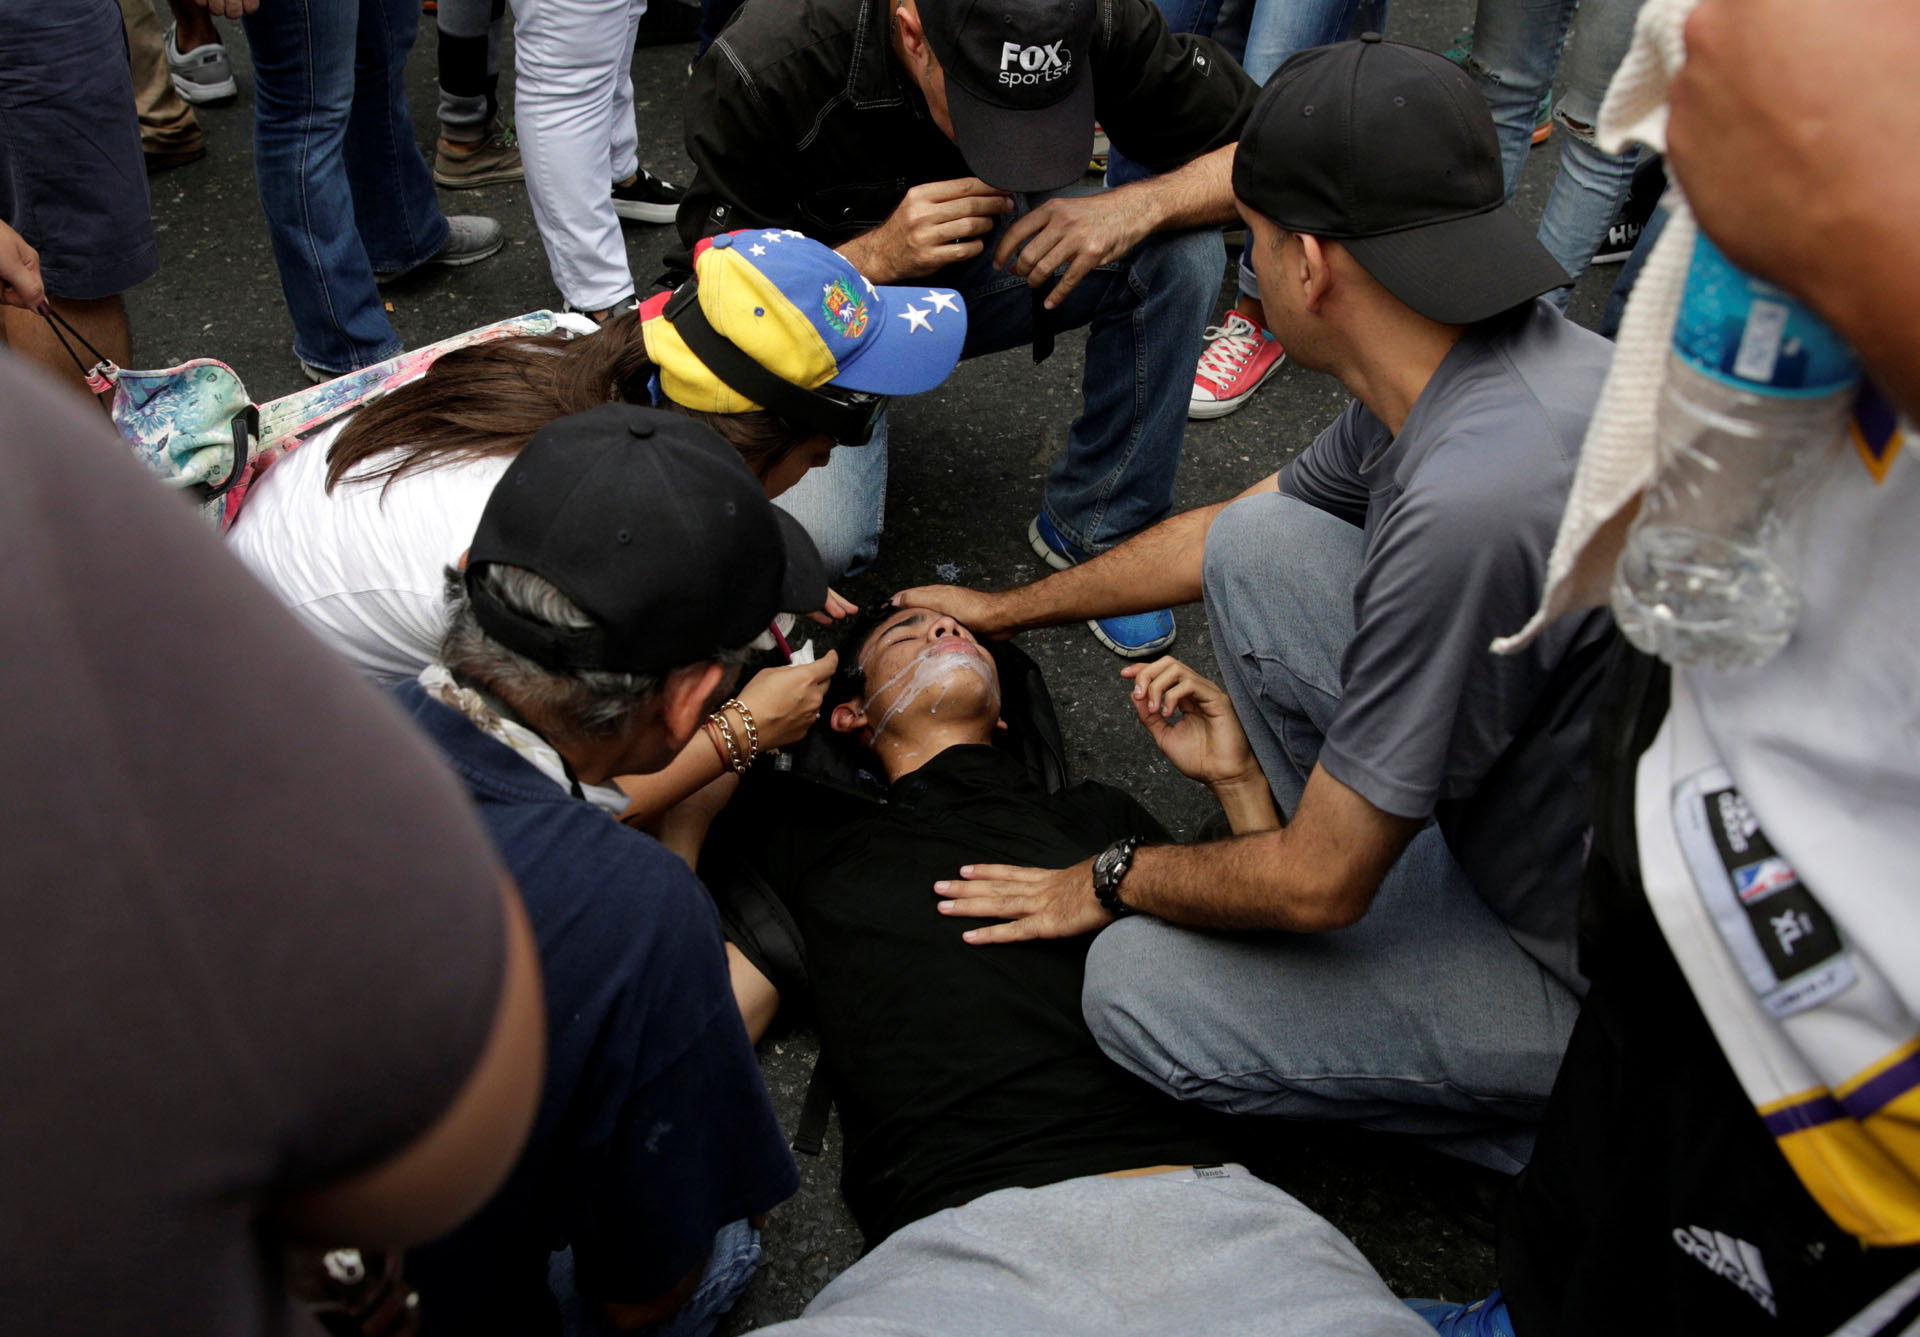 Demonstrators attend to a fellow protester during an opposition rally in Caracas, Venezuela, April 6, 2017. REUTERS/Carlos Garcia Rawlins